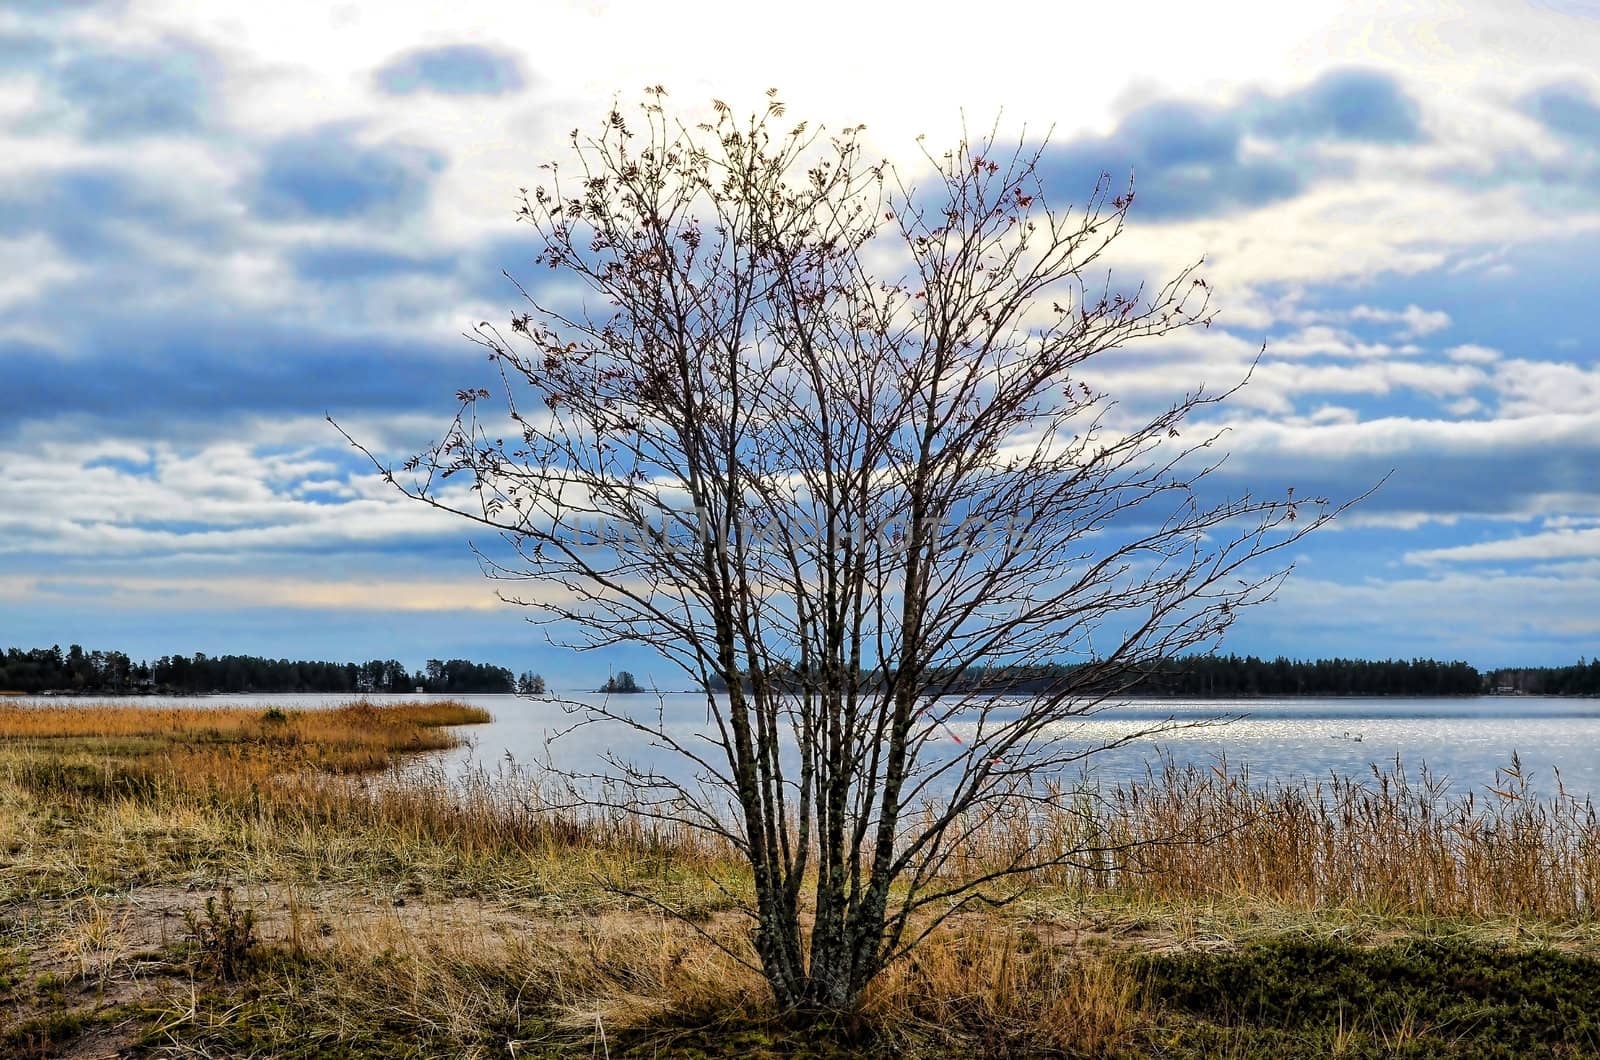 A tree in the archipelago, which has lost all leaves in the autumn time